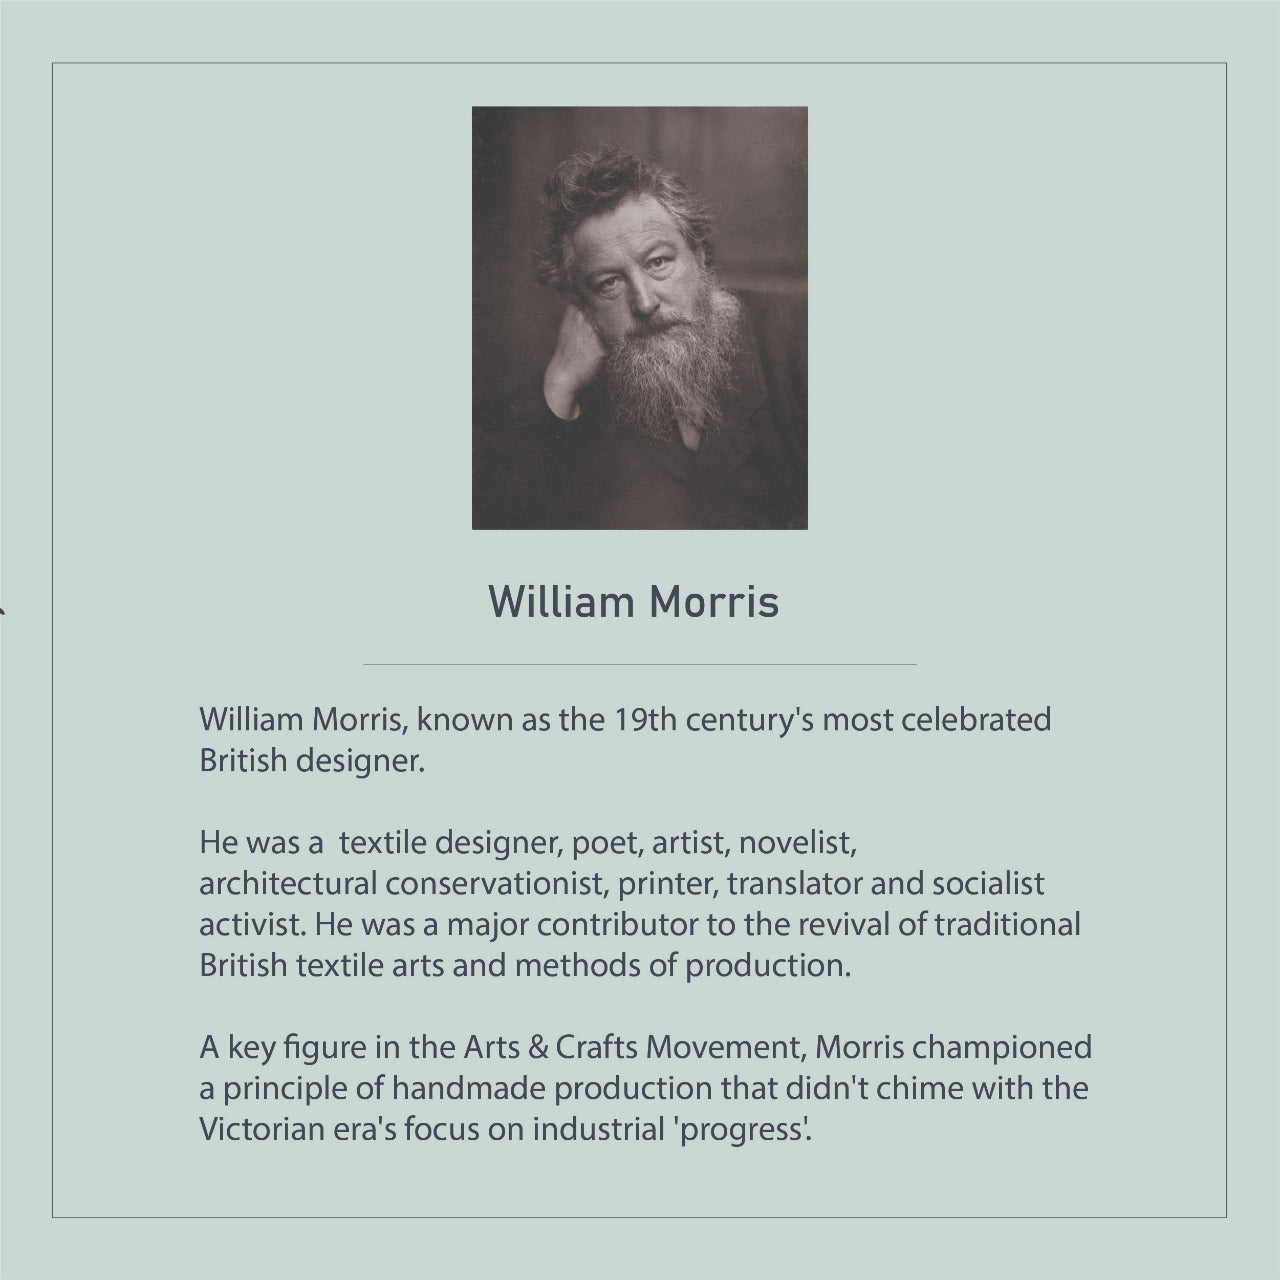 William Morris - Lilly Growing Silver Finger Ring by Moha